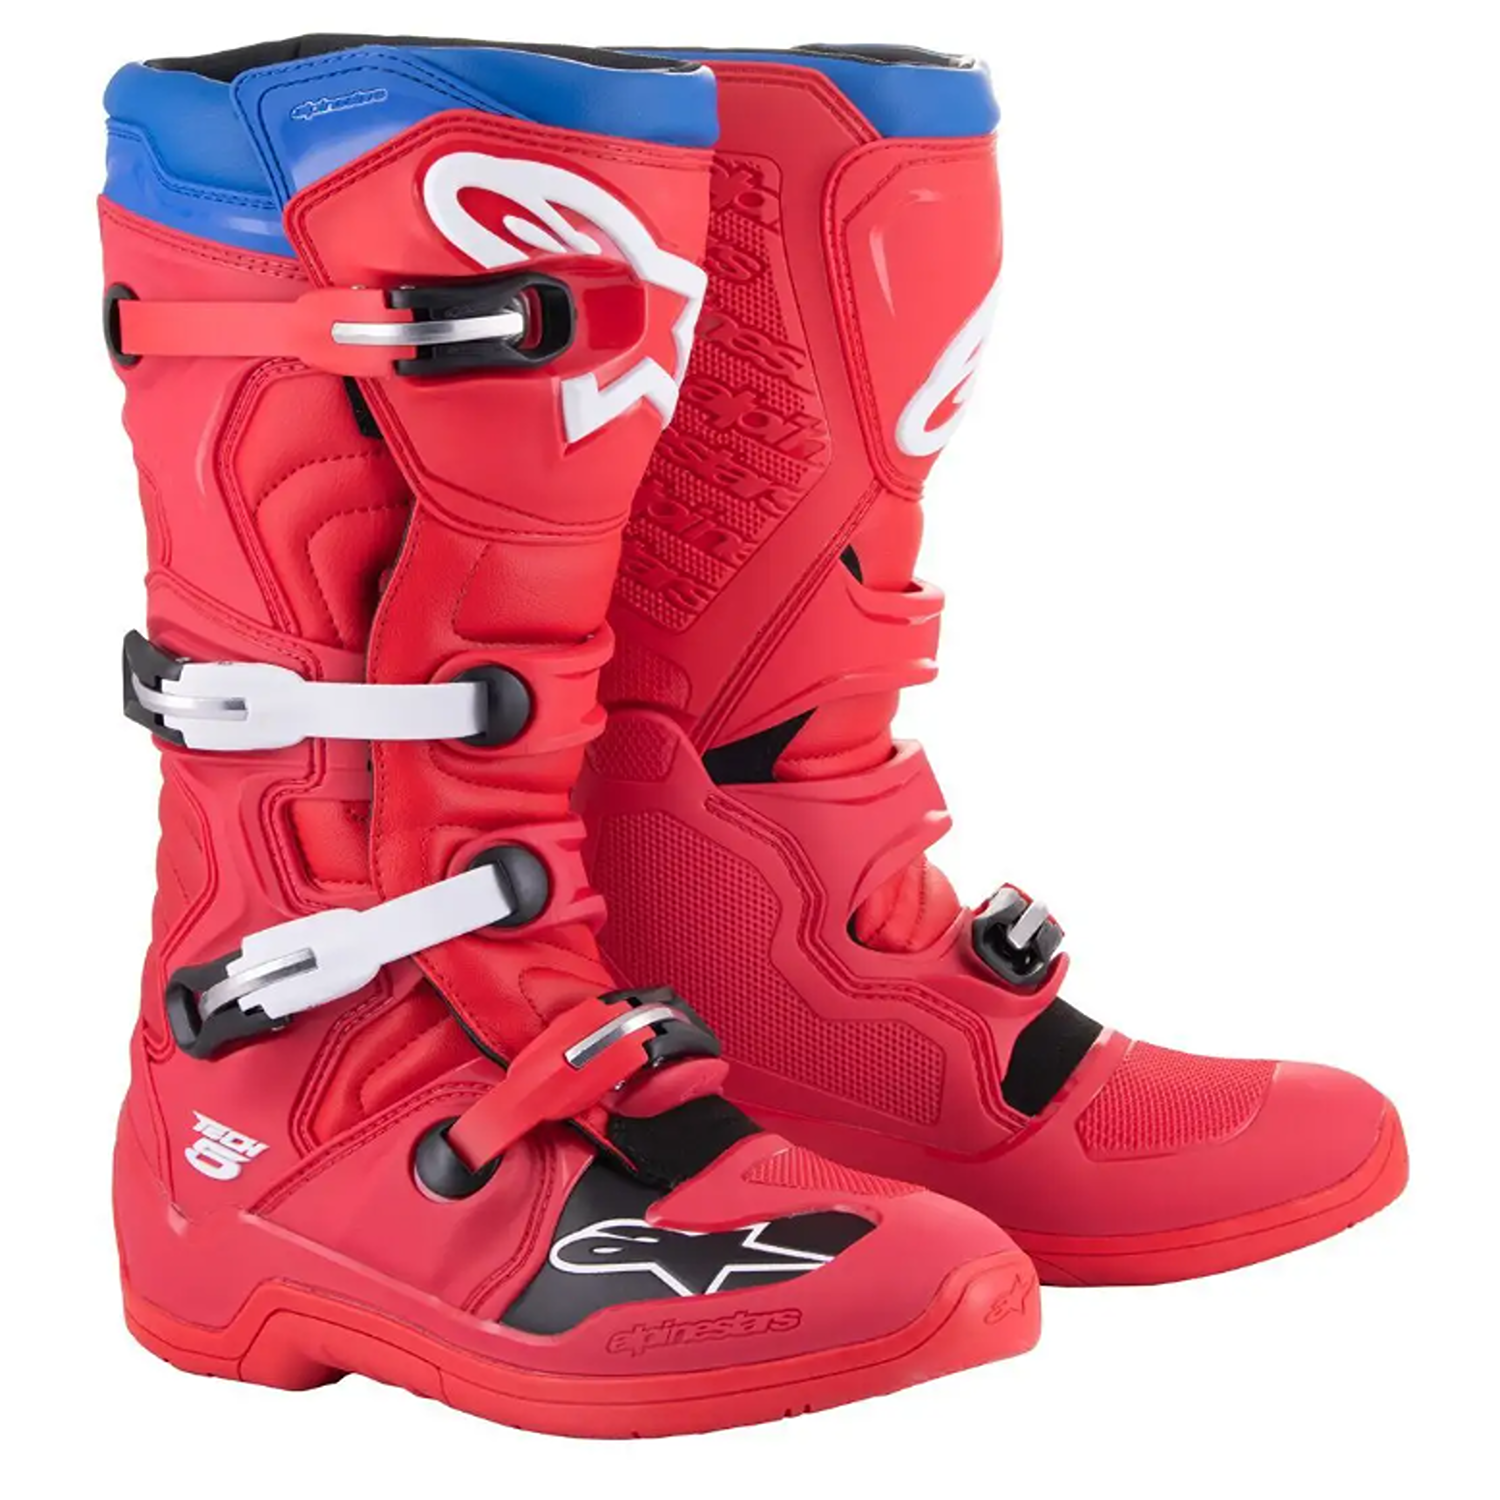 Image of EU Alpinestars Tech 5 Boots Bright Red Dark Red Blue Taille US 7